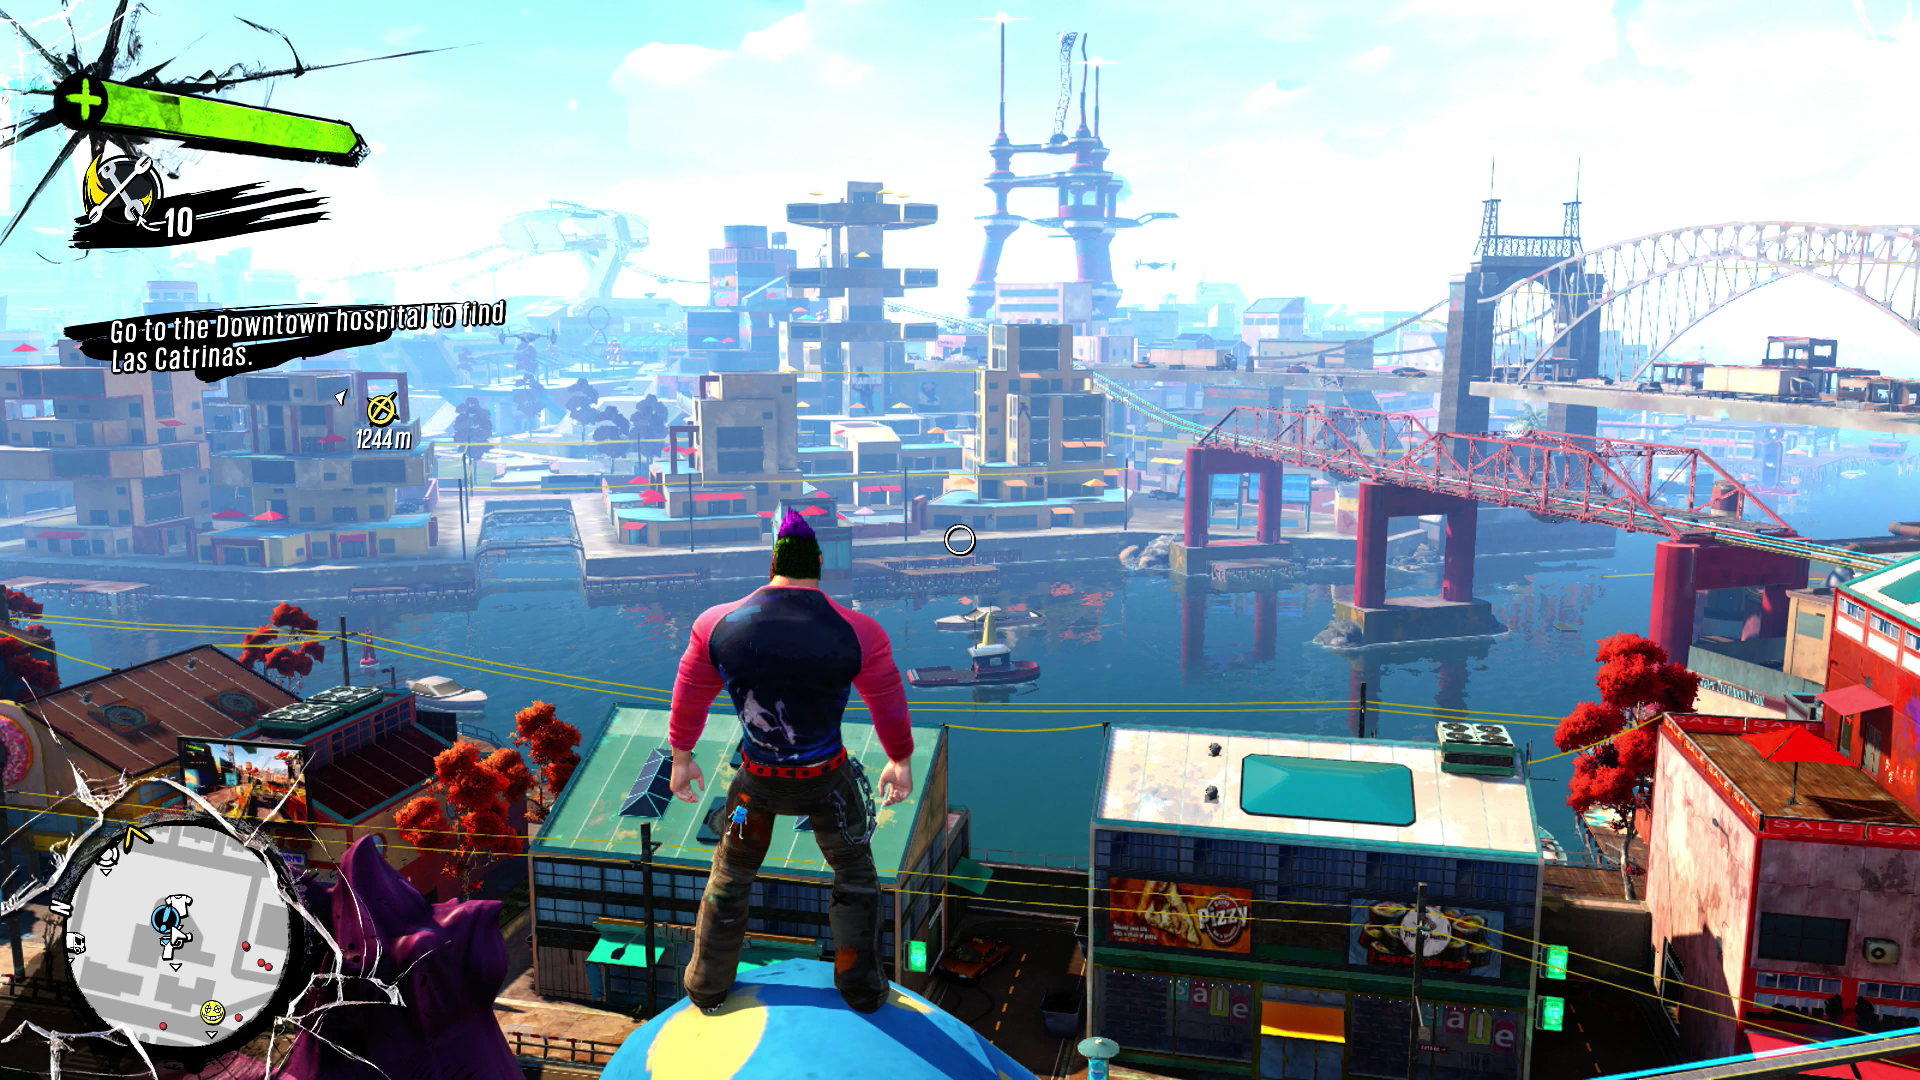 Sunset Overdrive Xbox One Game Review